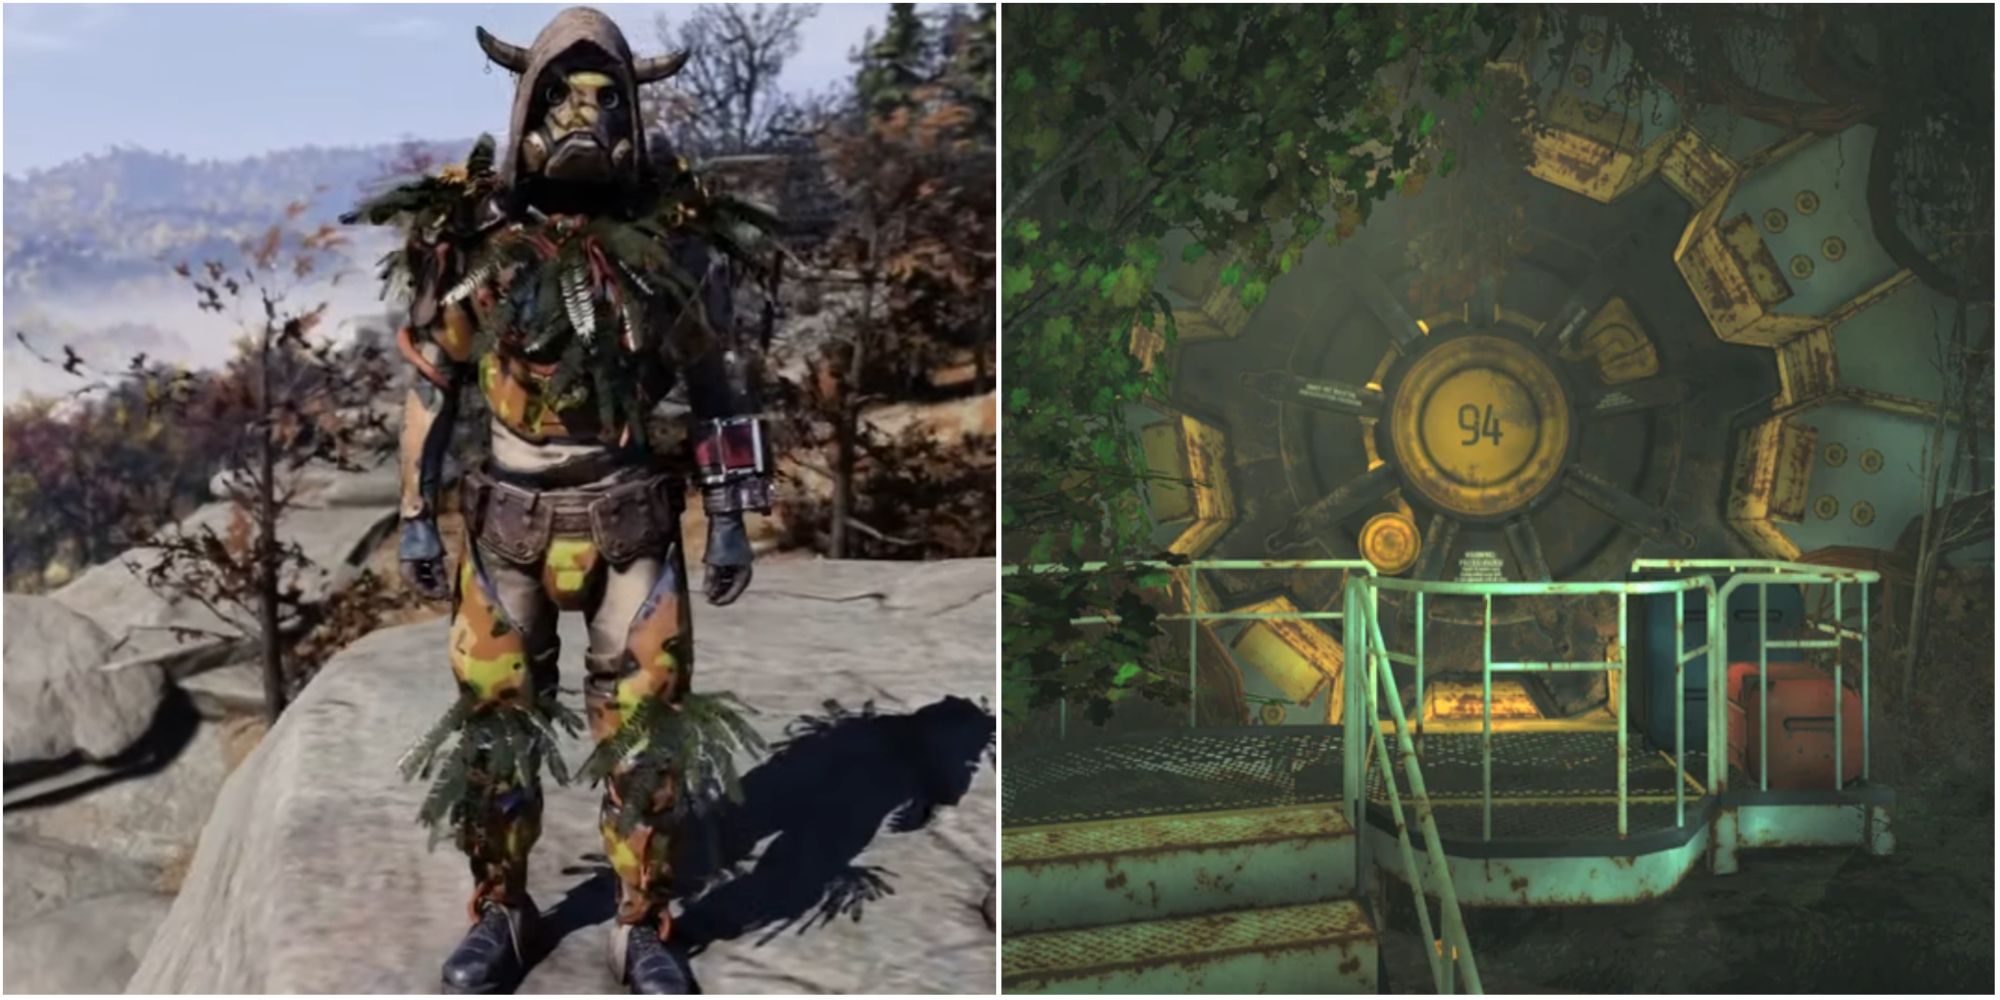 Fallout 76 Thorn Armor And Vault 94